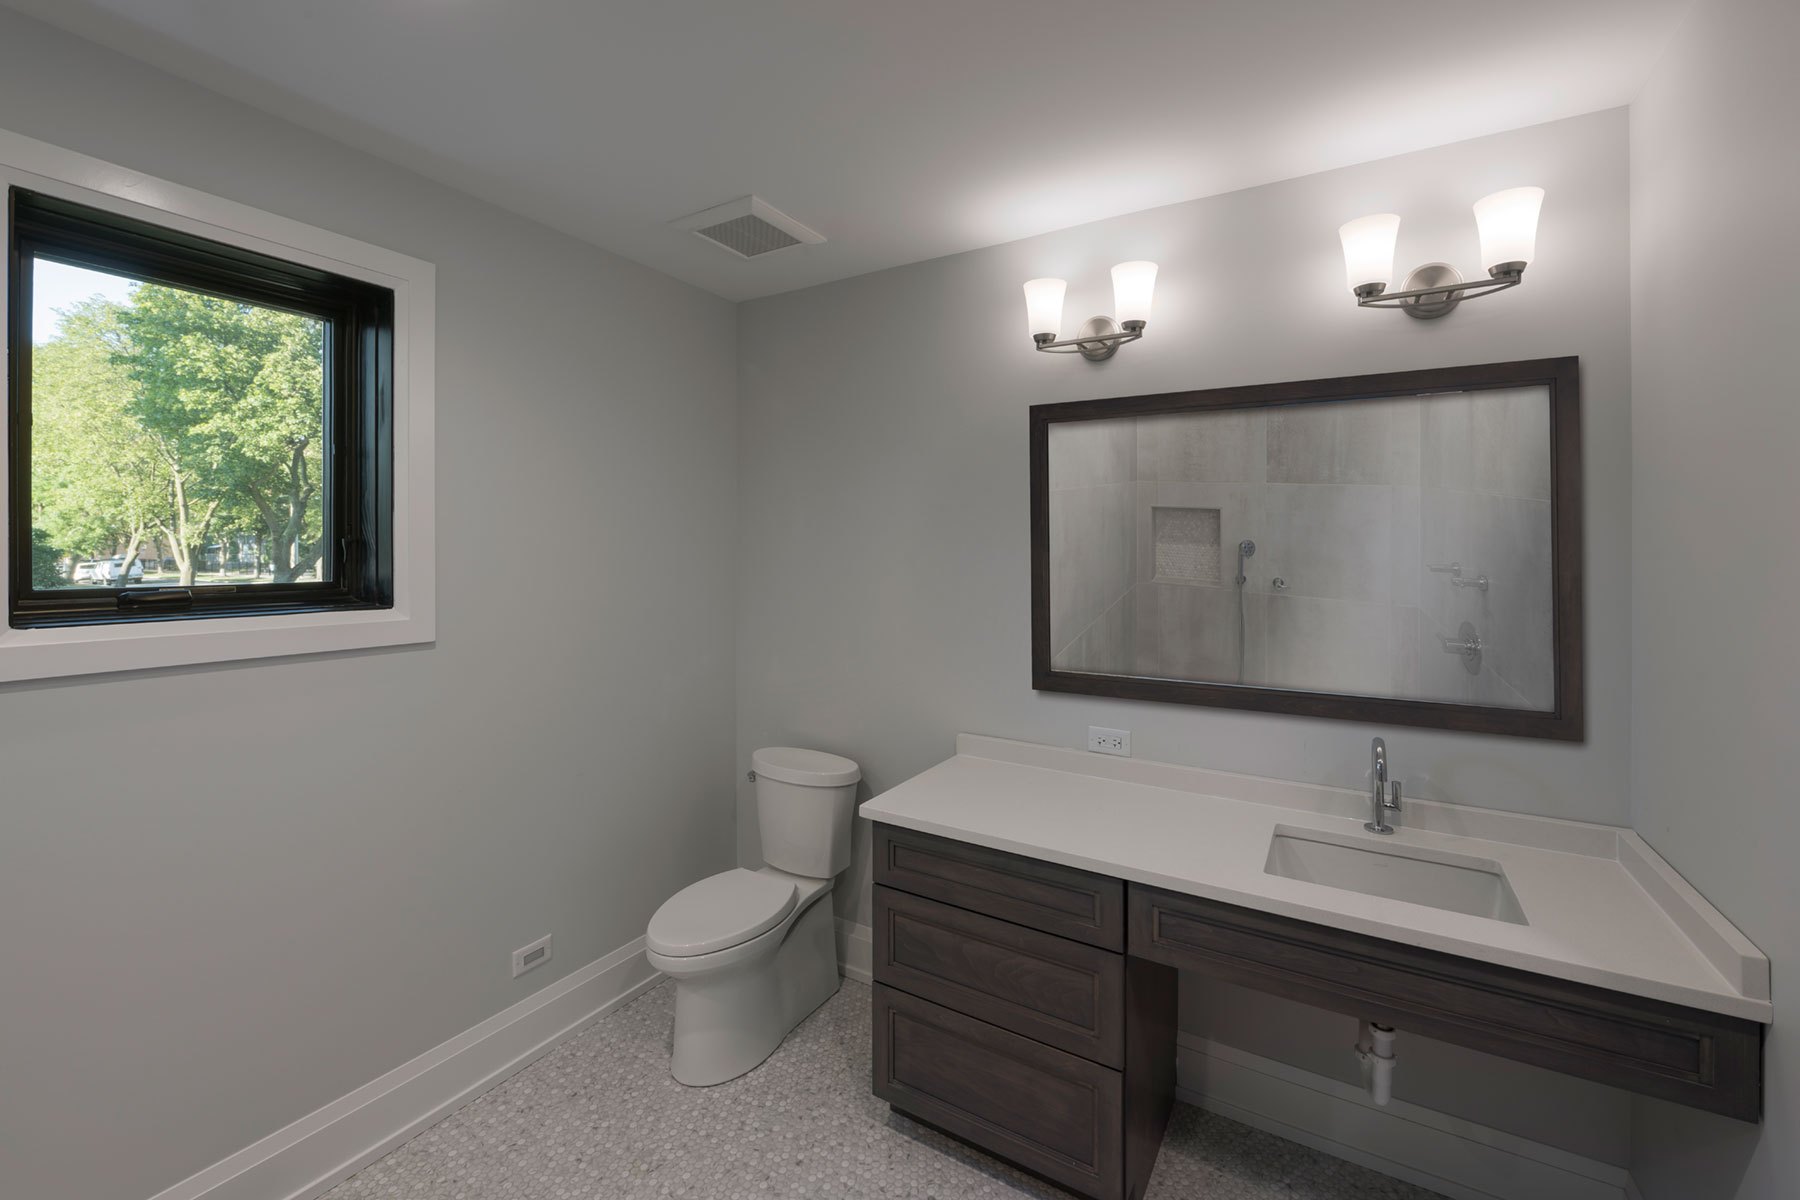 1st Floor Master Bathroom - N. Francisco Ave., Chicago, IL Custom Home. America's Custom Home Builders: New Construction, Remodeling, Restoration Services. Residential and Commercial.